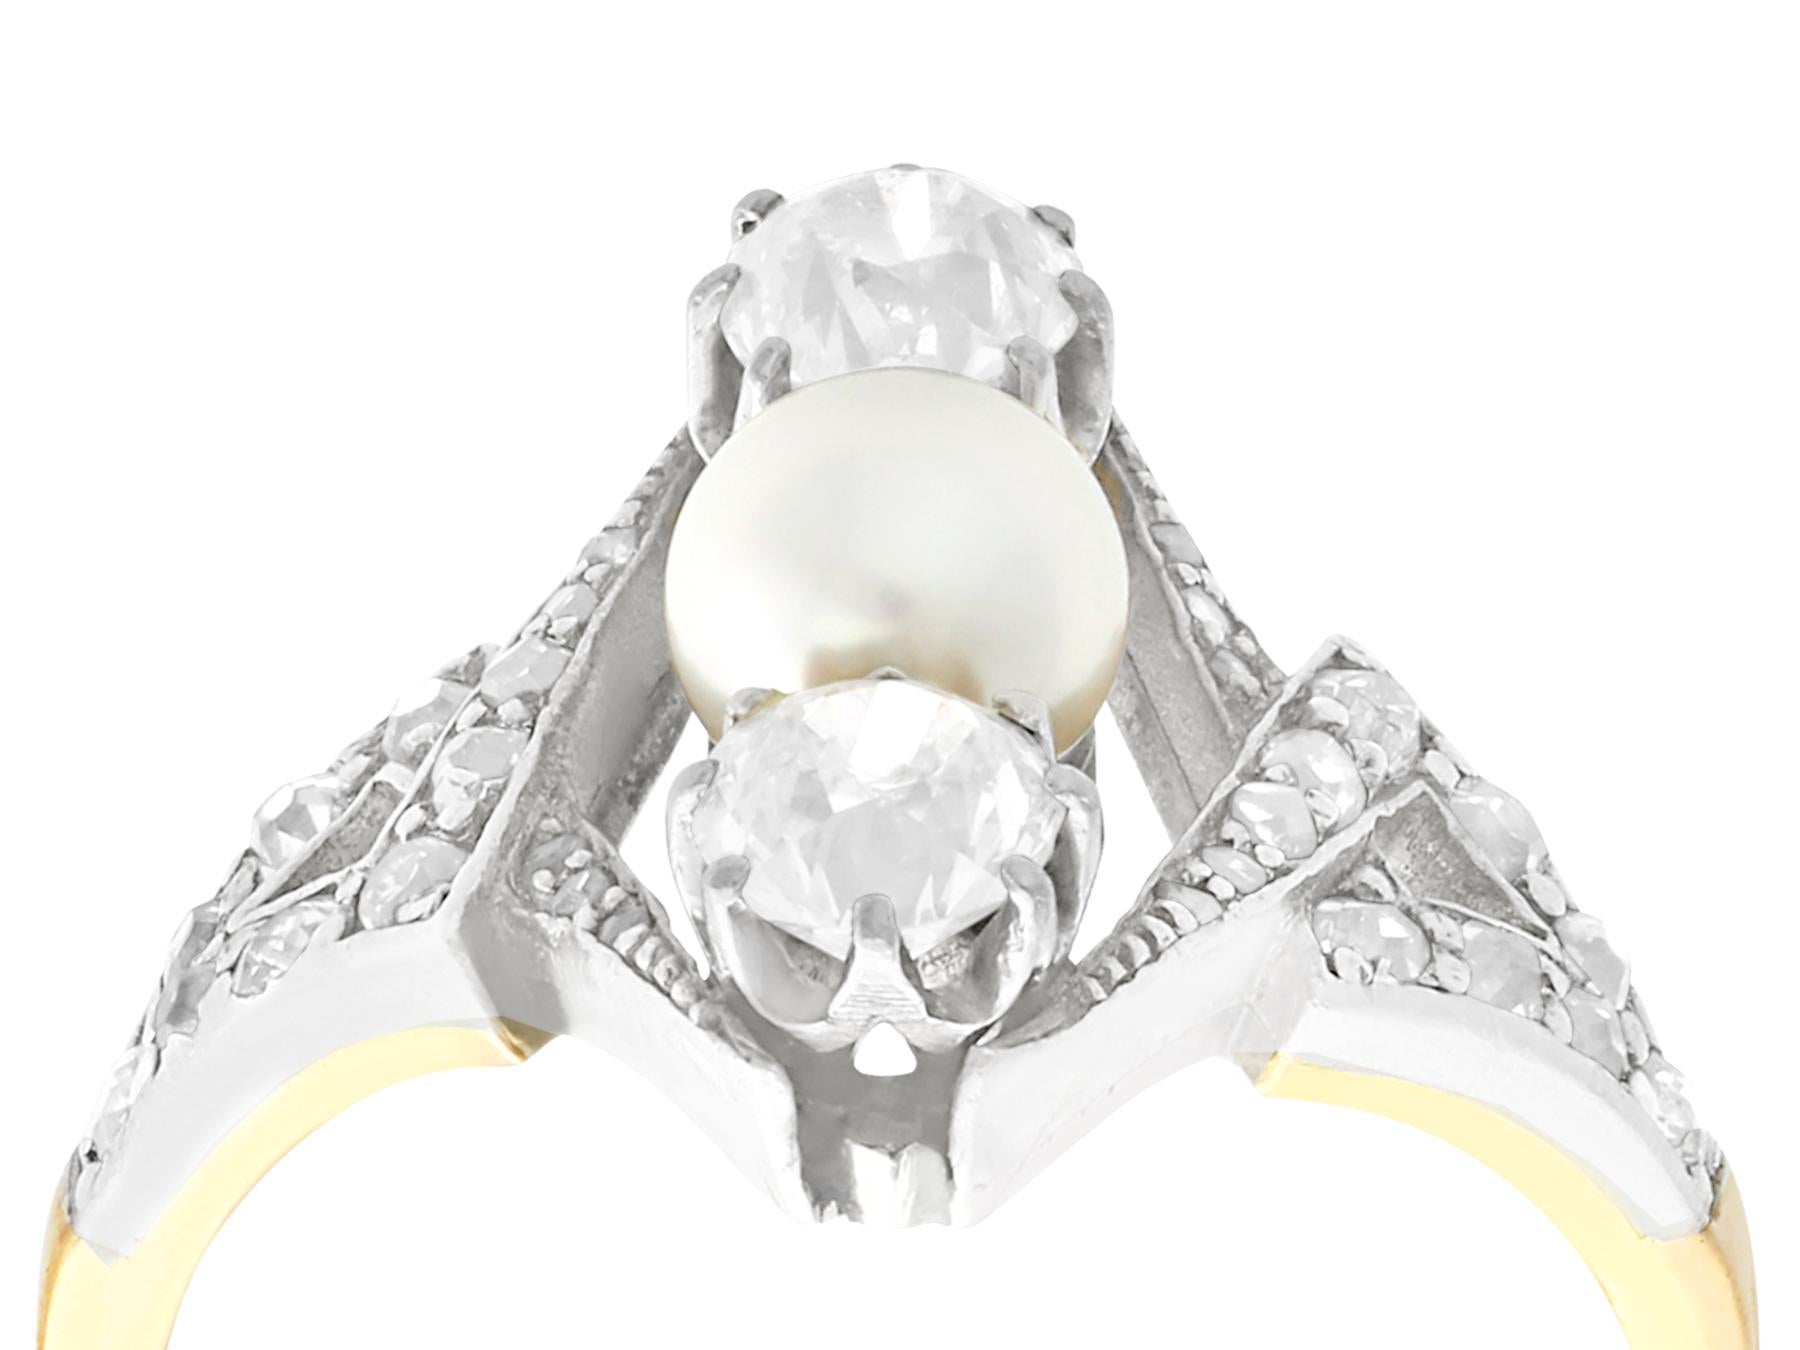 A fine and impressive antique 1.15 carat diamond and cultured pearl, 18k yellow gold, platinum set dress ring; part of our antique jewelry and estate jewelry collections.

This impressive antique diamond and pearl ring has been crafted in 18k yellow